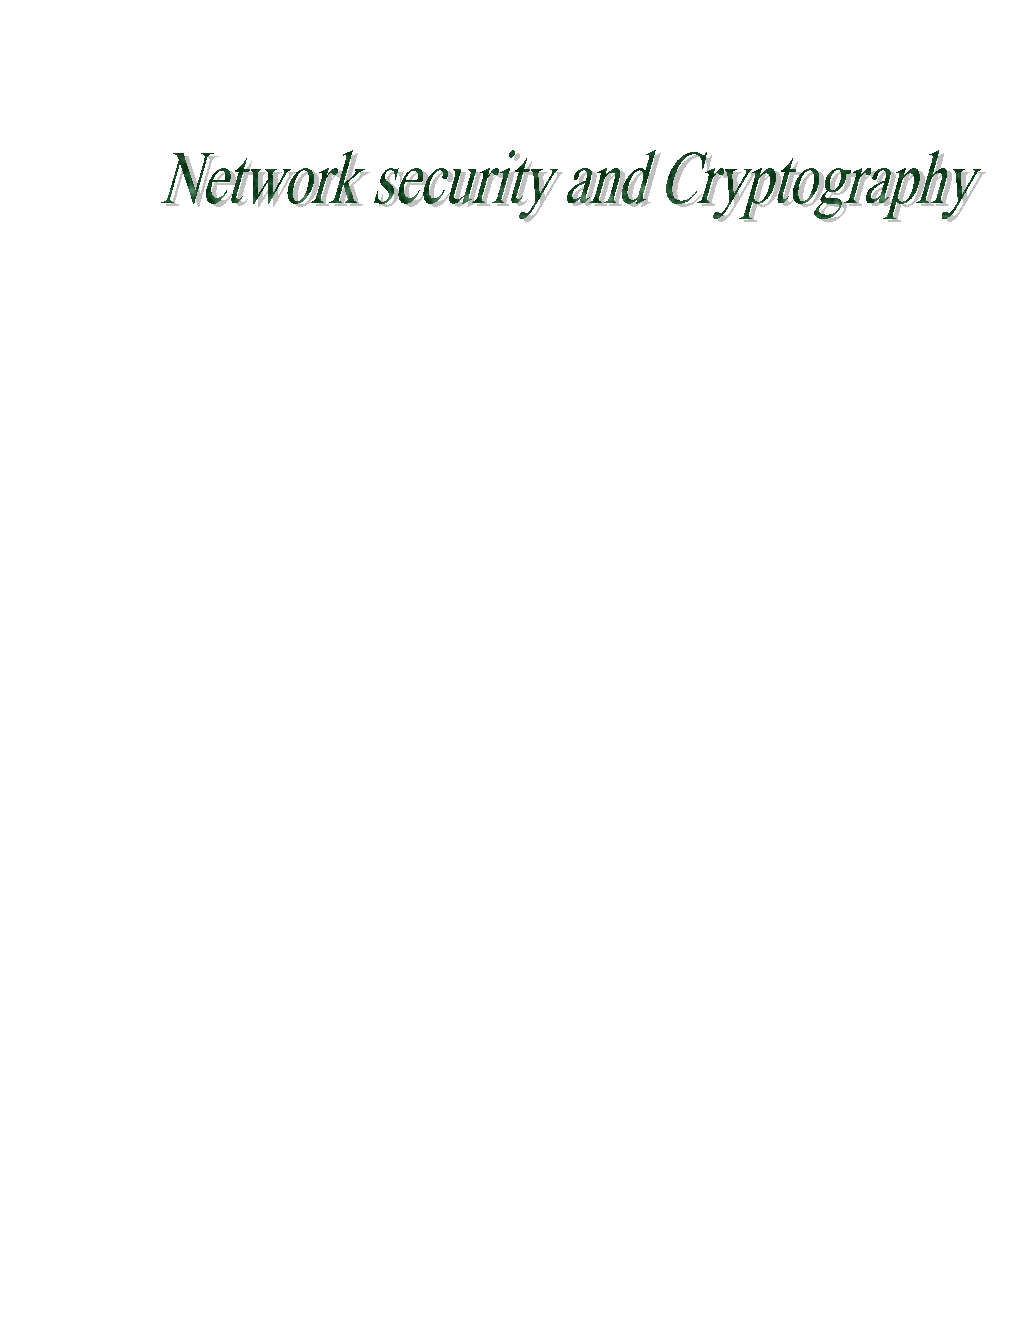 This Paper Aims to Provide a Broad Review of Network Security and Cryptography . Network